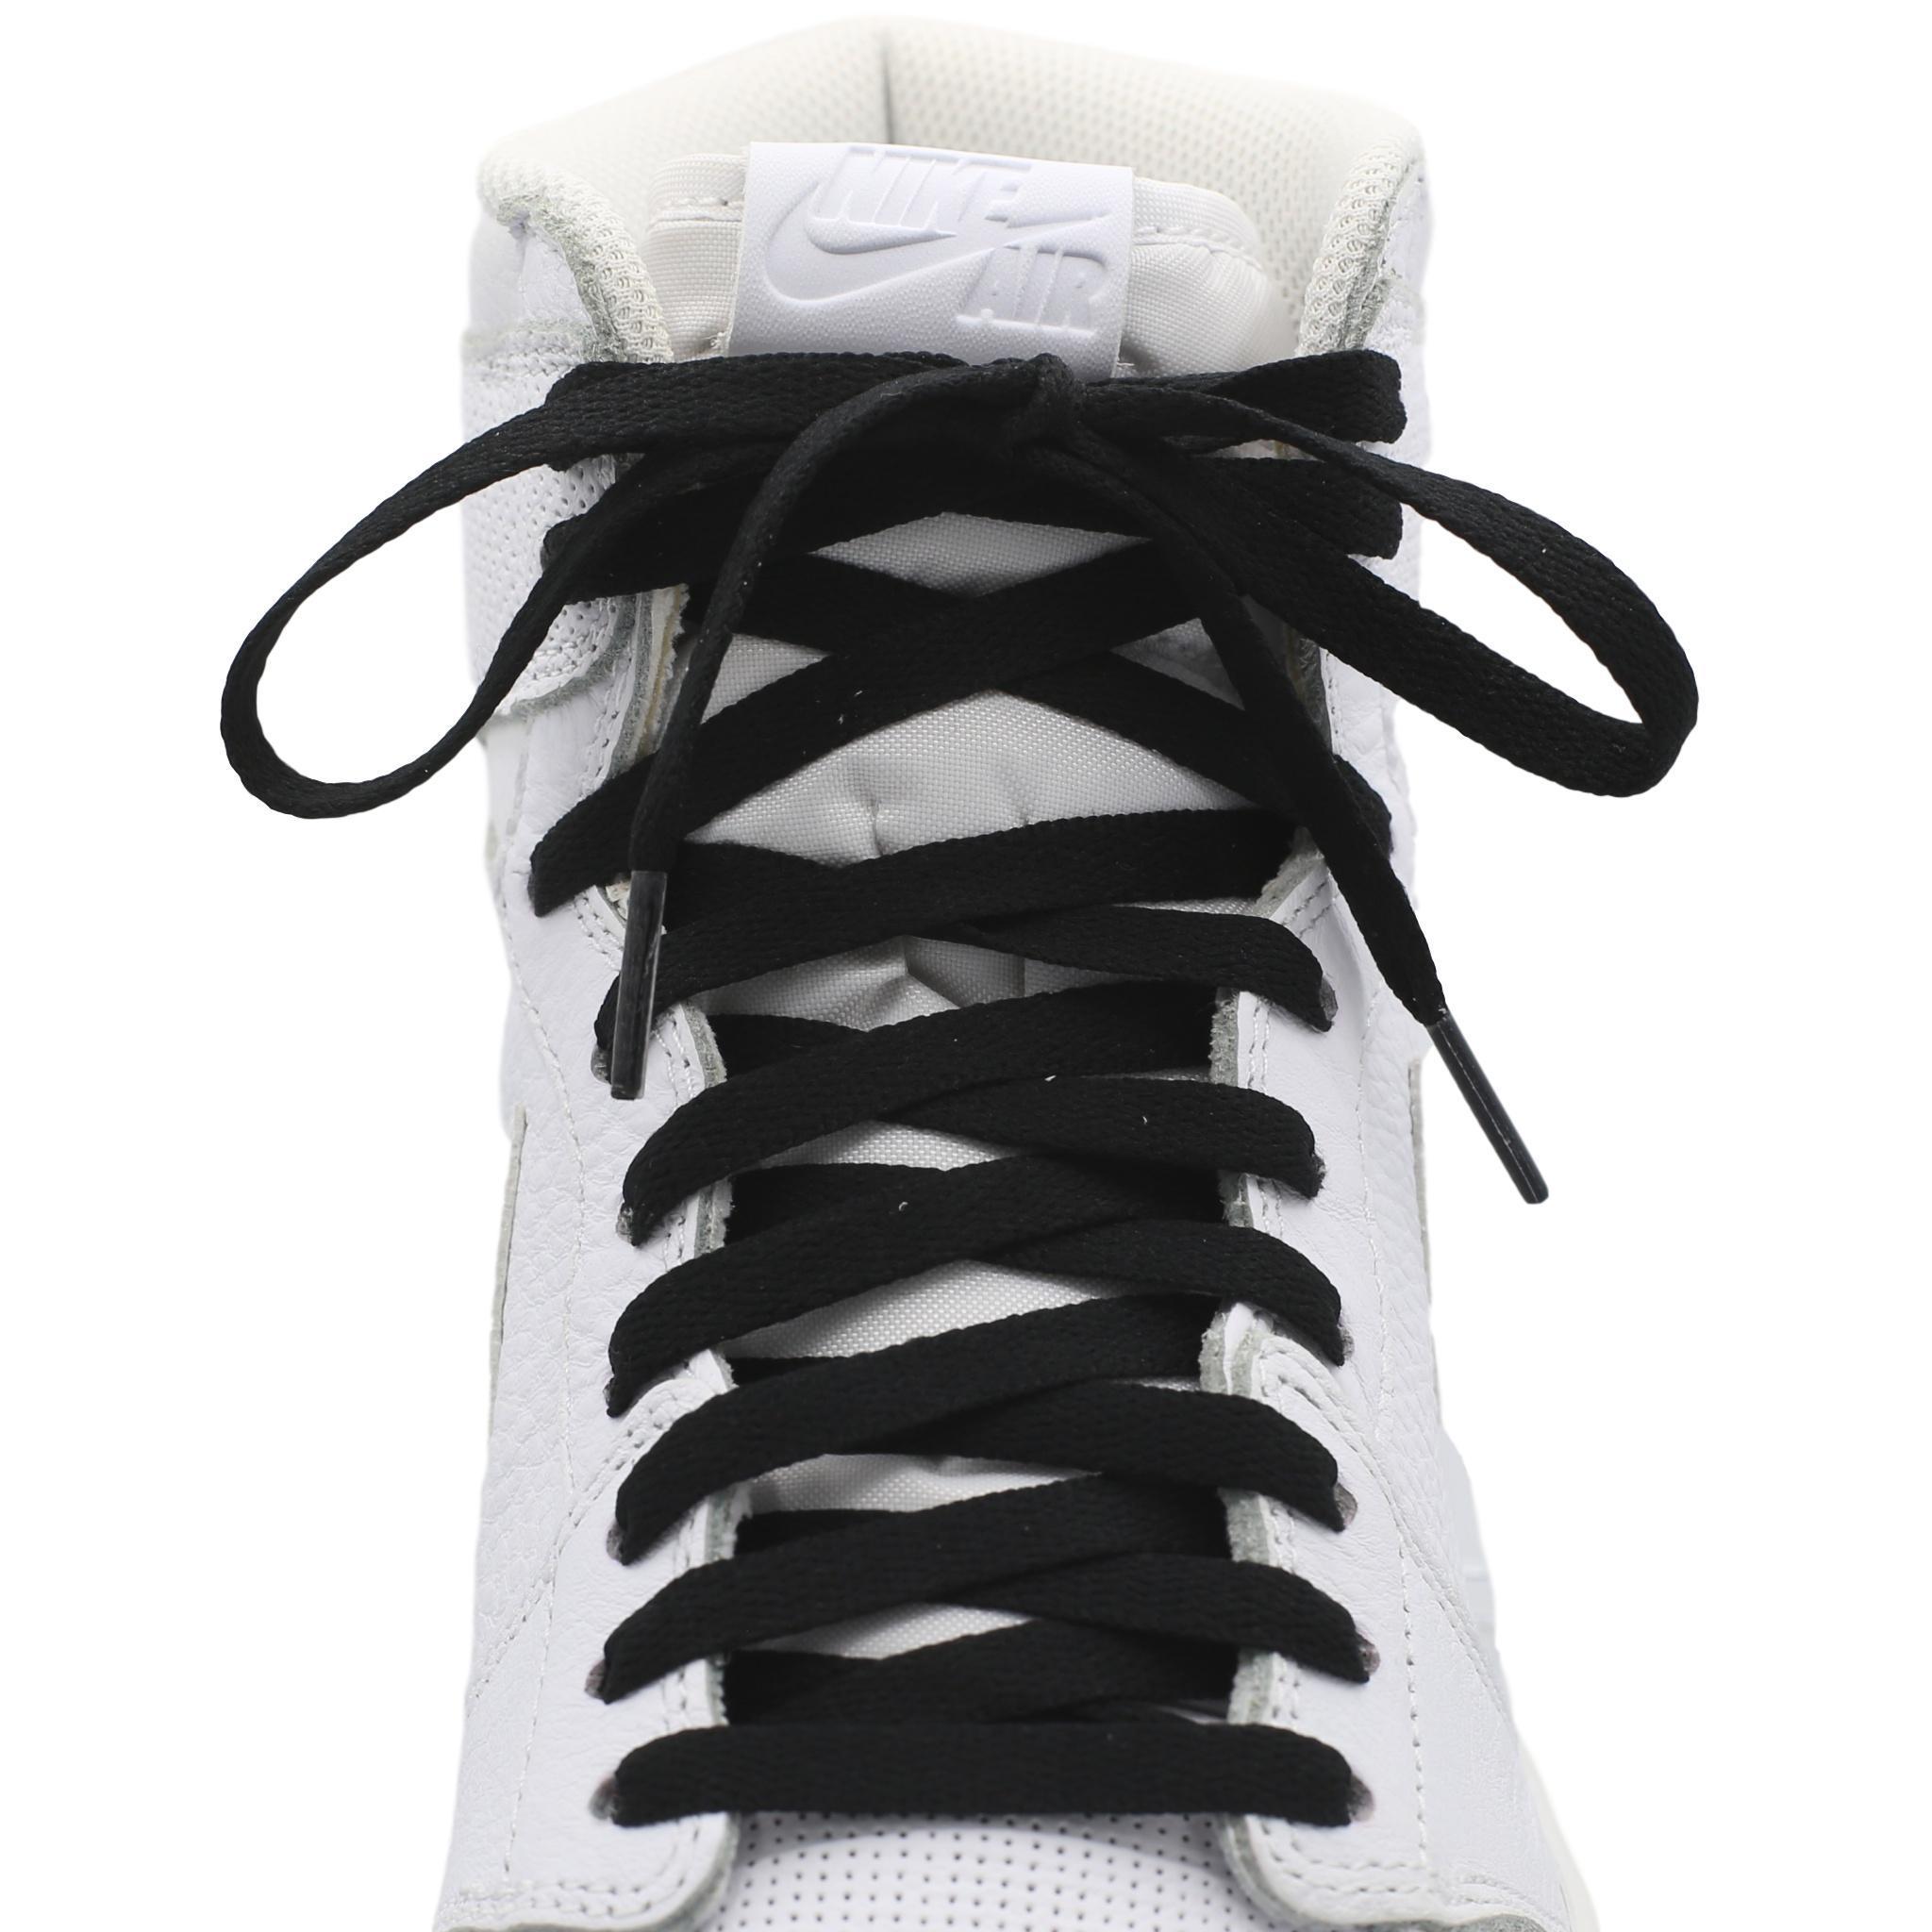 Jordan and Dunk Replacement Shoe Laces